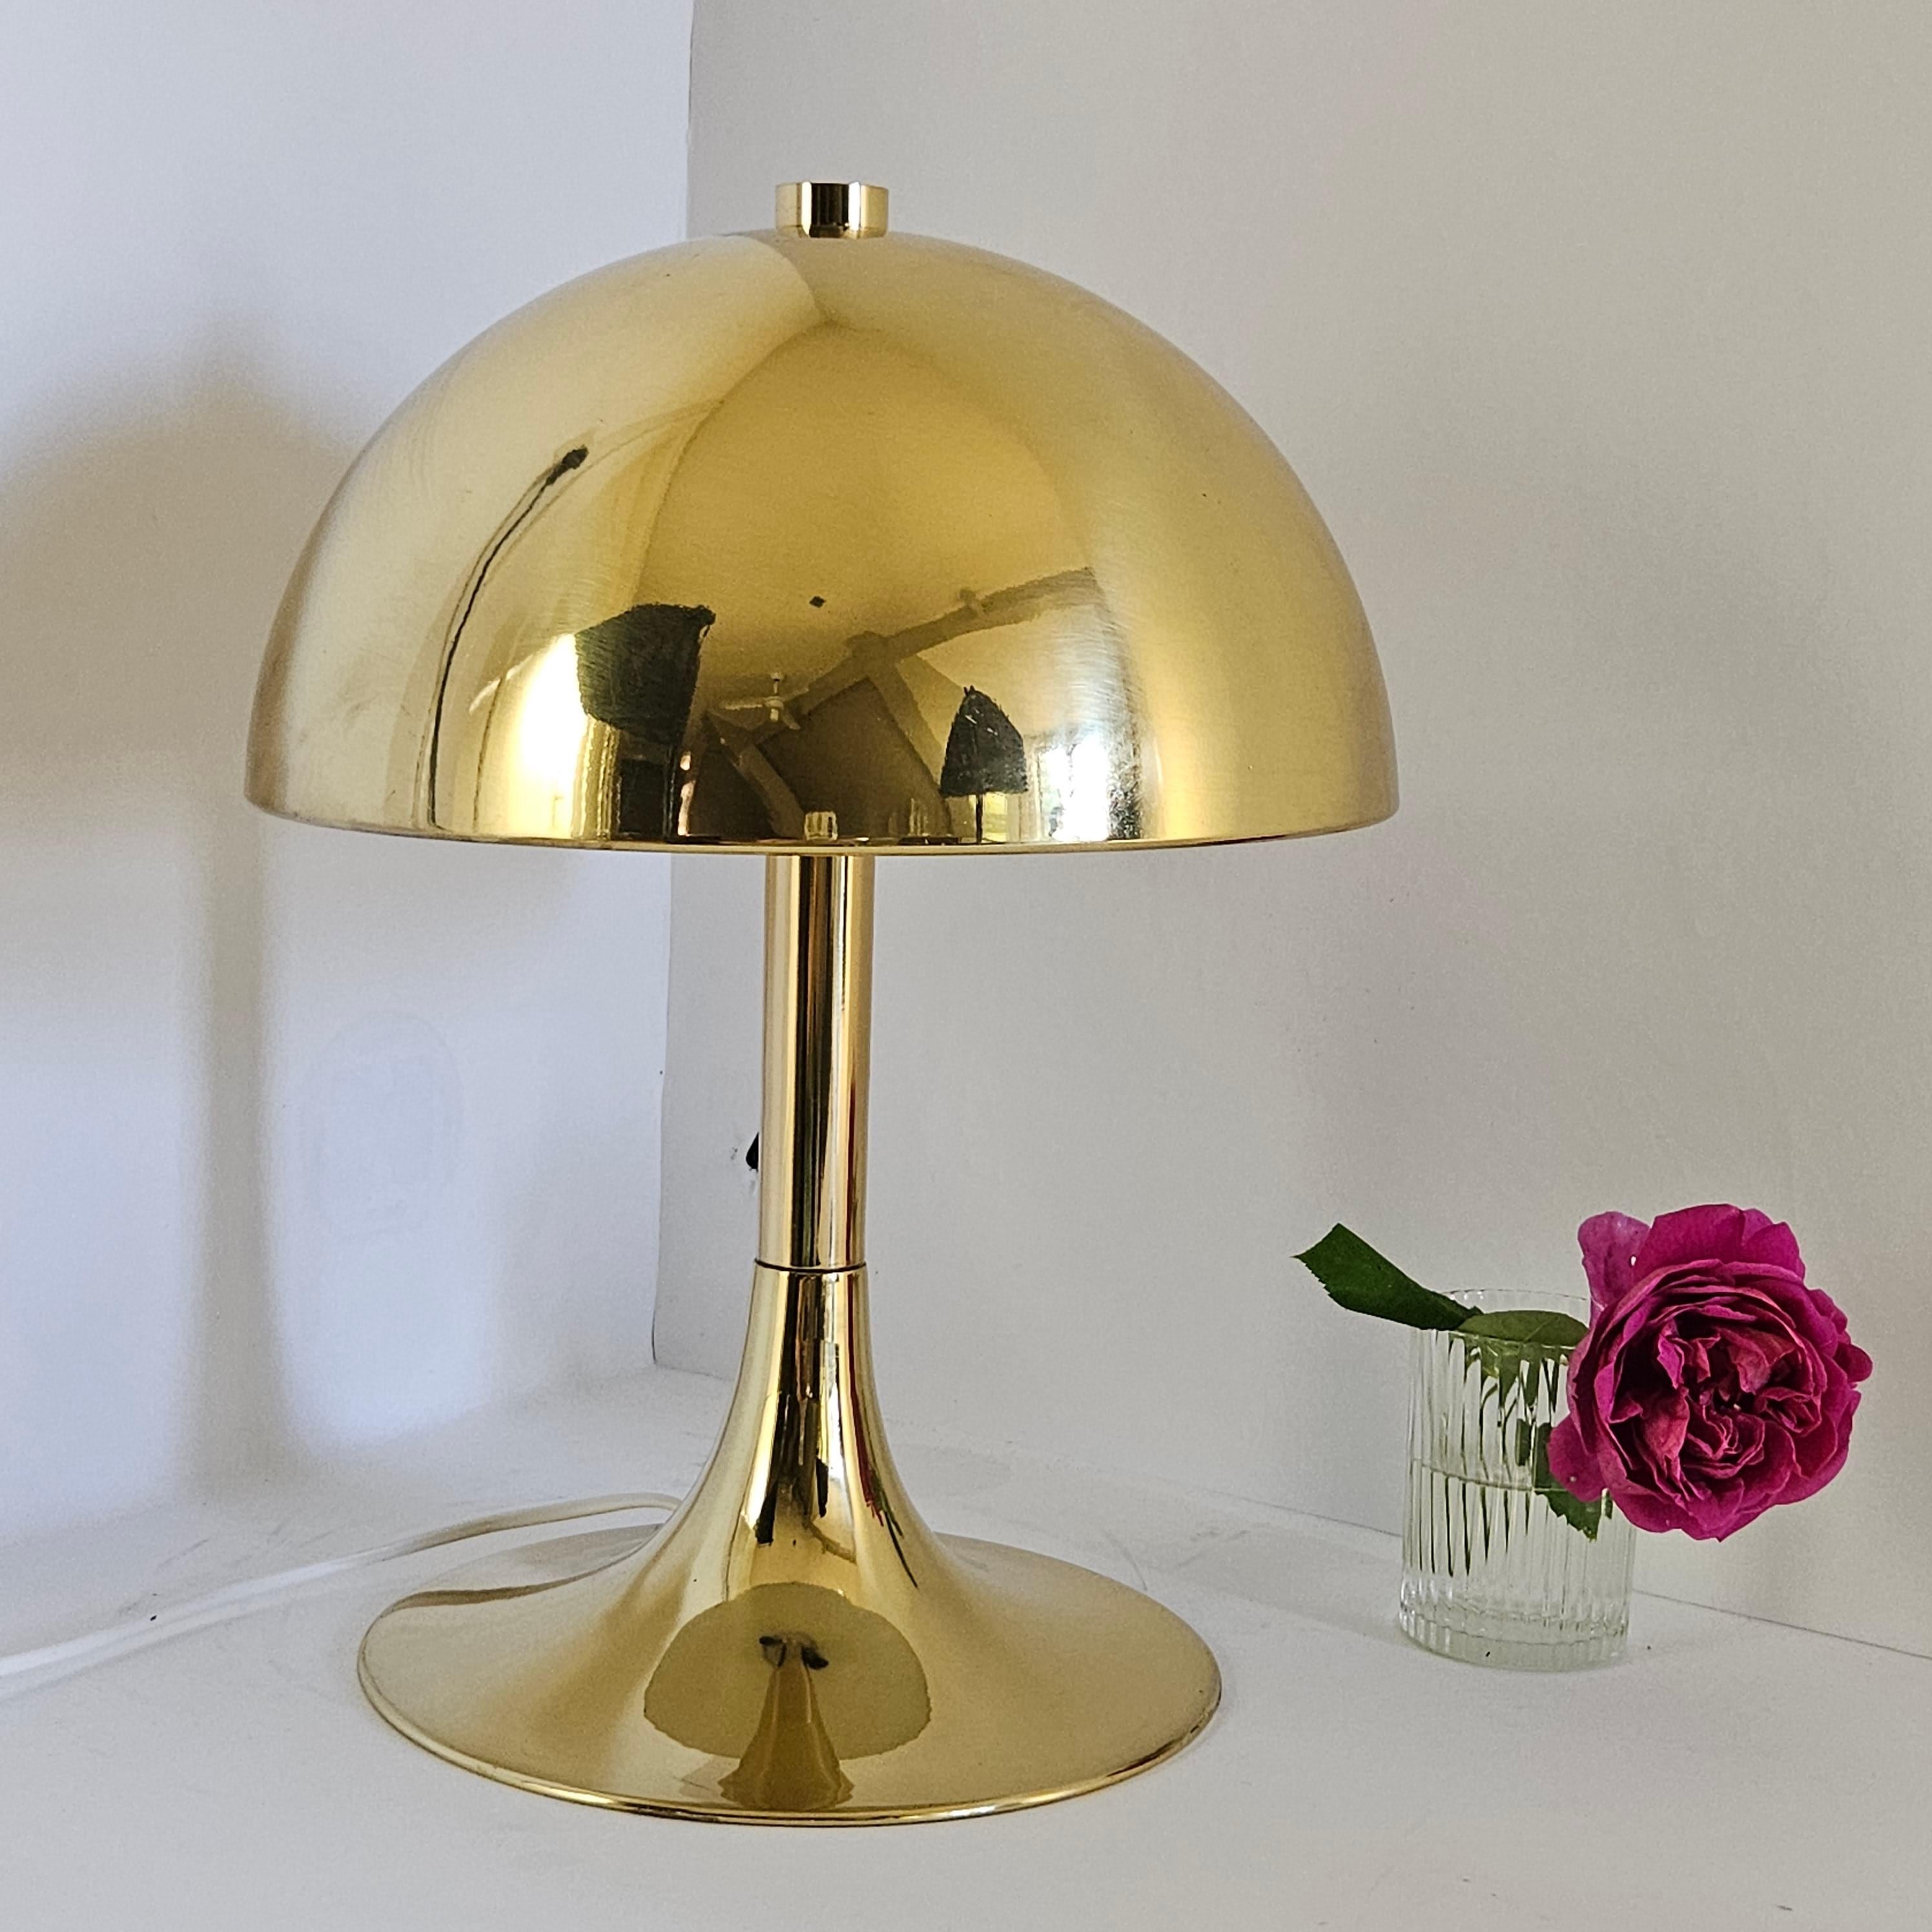 Very nice table lamp, fabricated in Italy in the 70's.

The elegant shape makes it look like a mushroom.
The shiny brass gives a stunning effect.

Some normal traces of use, see the pictures.
The lamp is rewired by a professional.